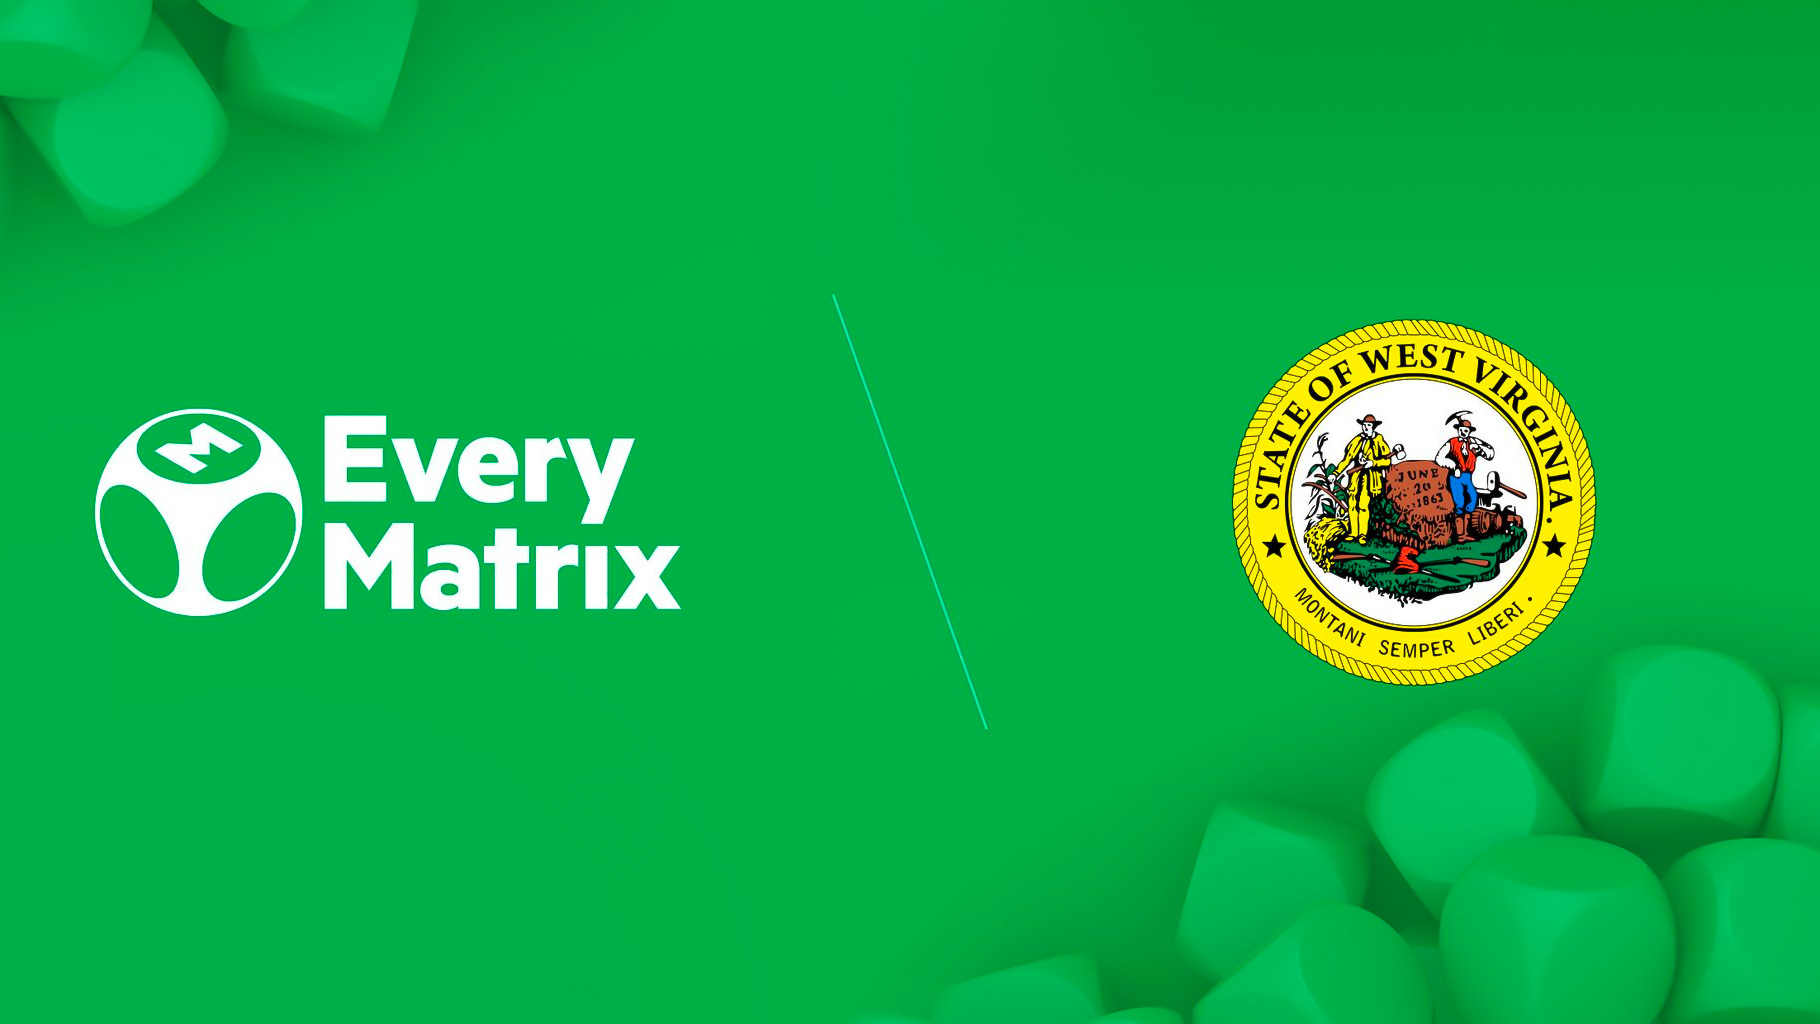 EveryMatrix further expands US footprint with new West Virginia license